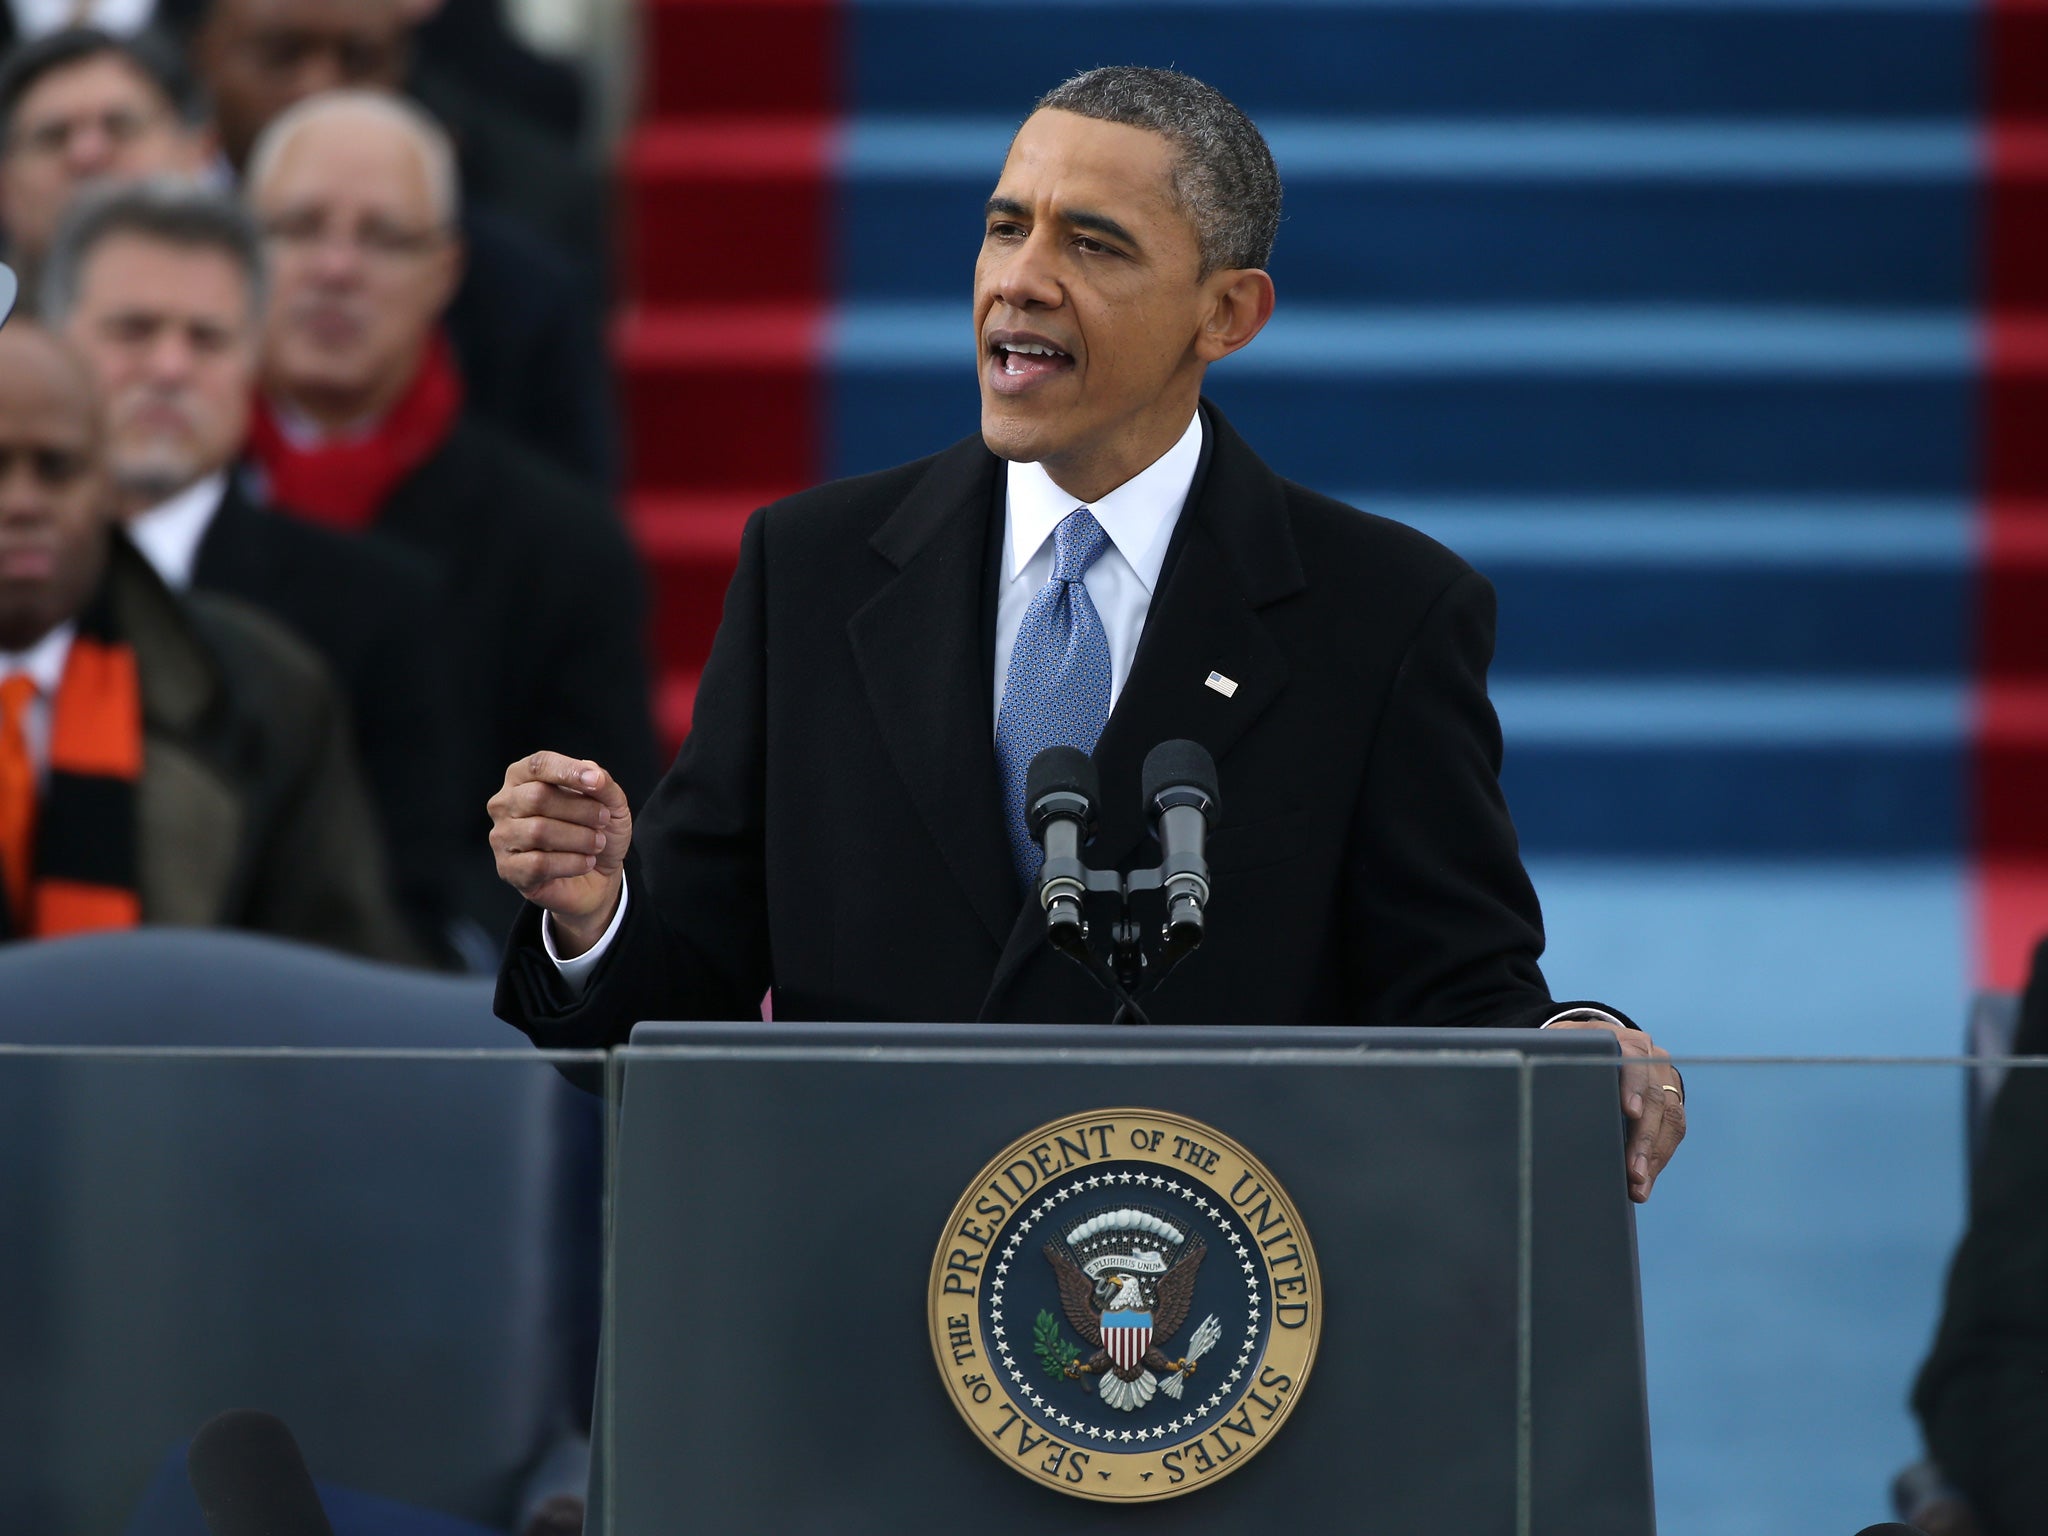 Obama delivers his second inaugural speech